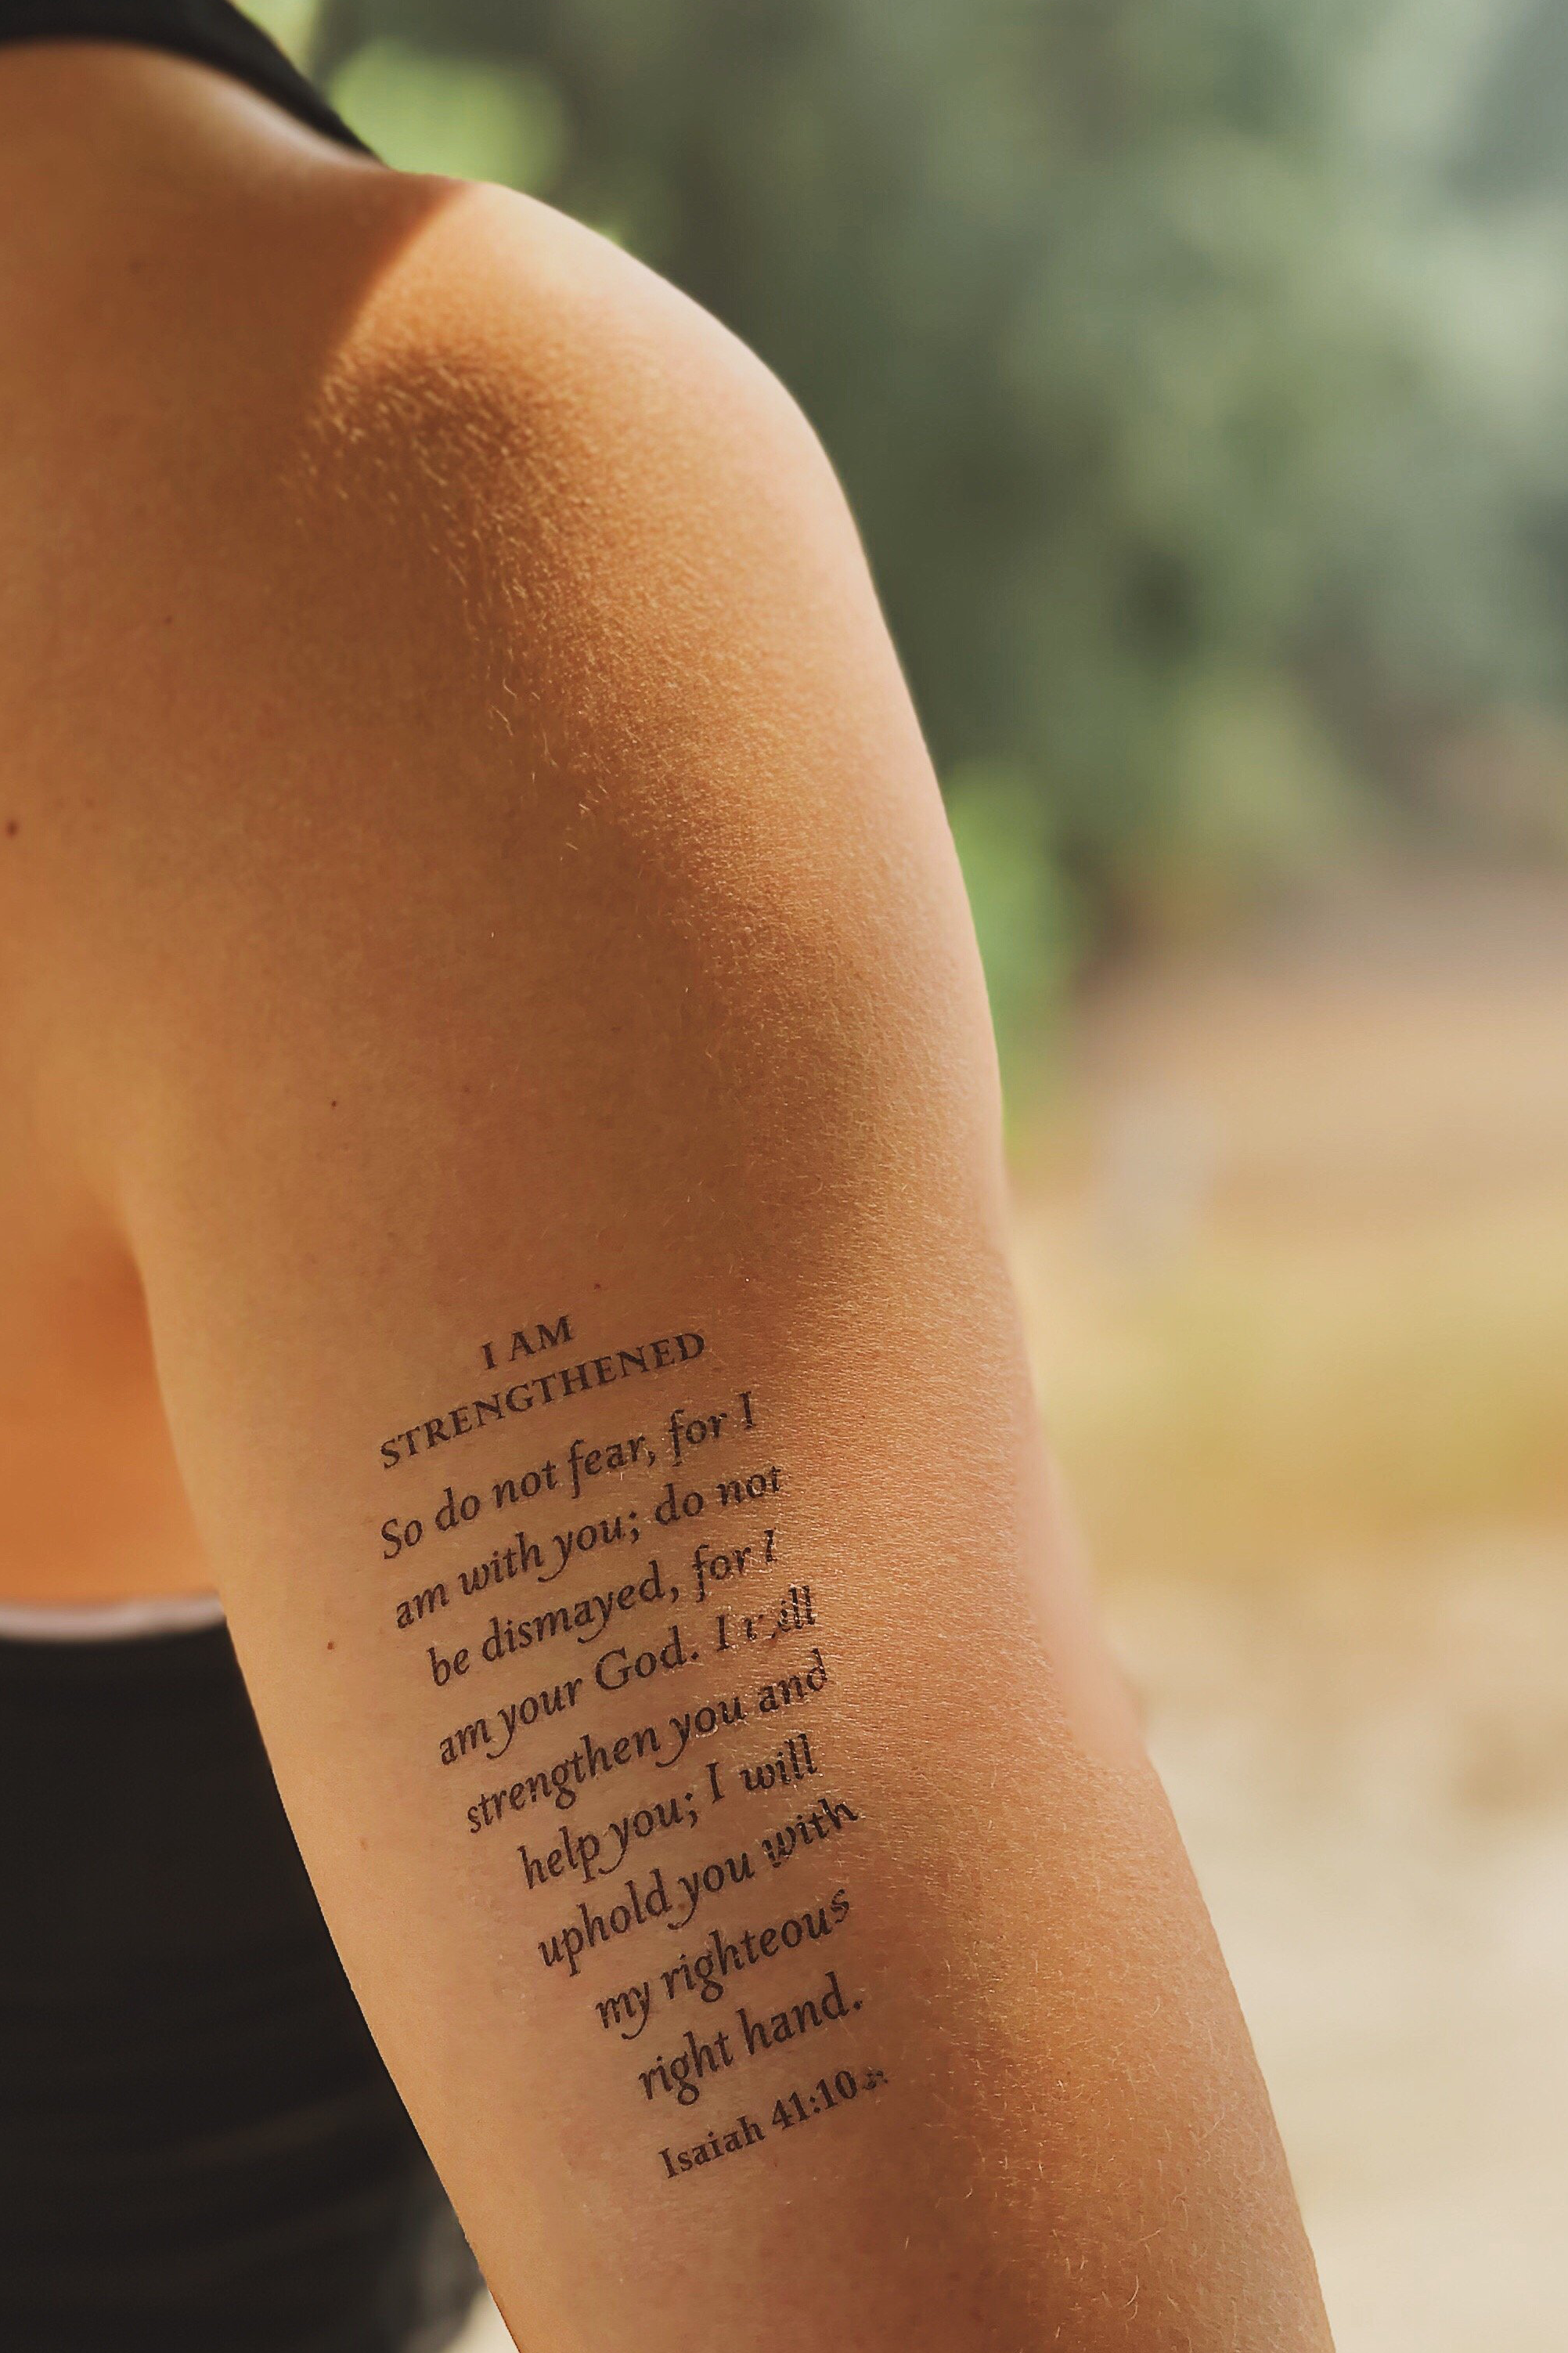 15 Inspirational Freedom Tattoo Designs for People of All Ages